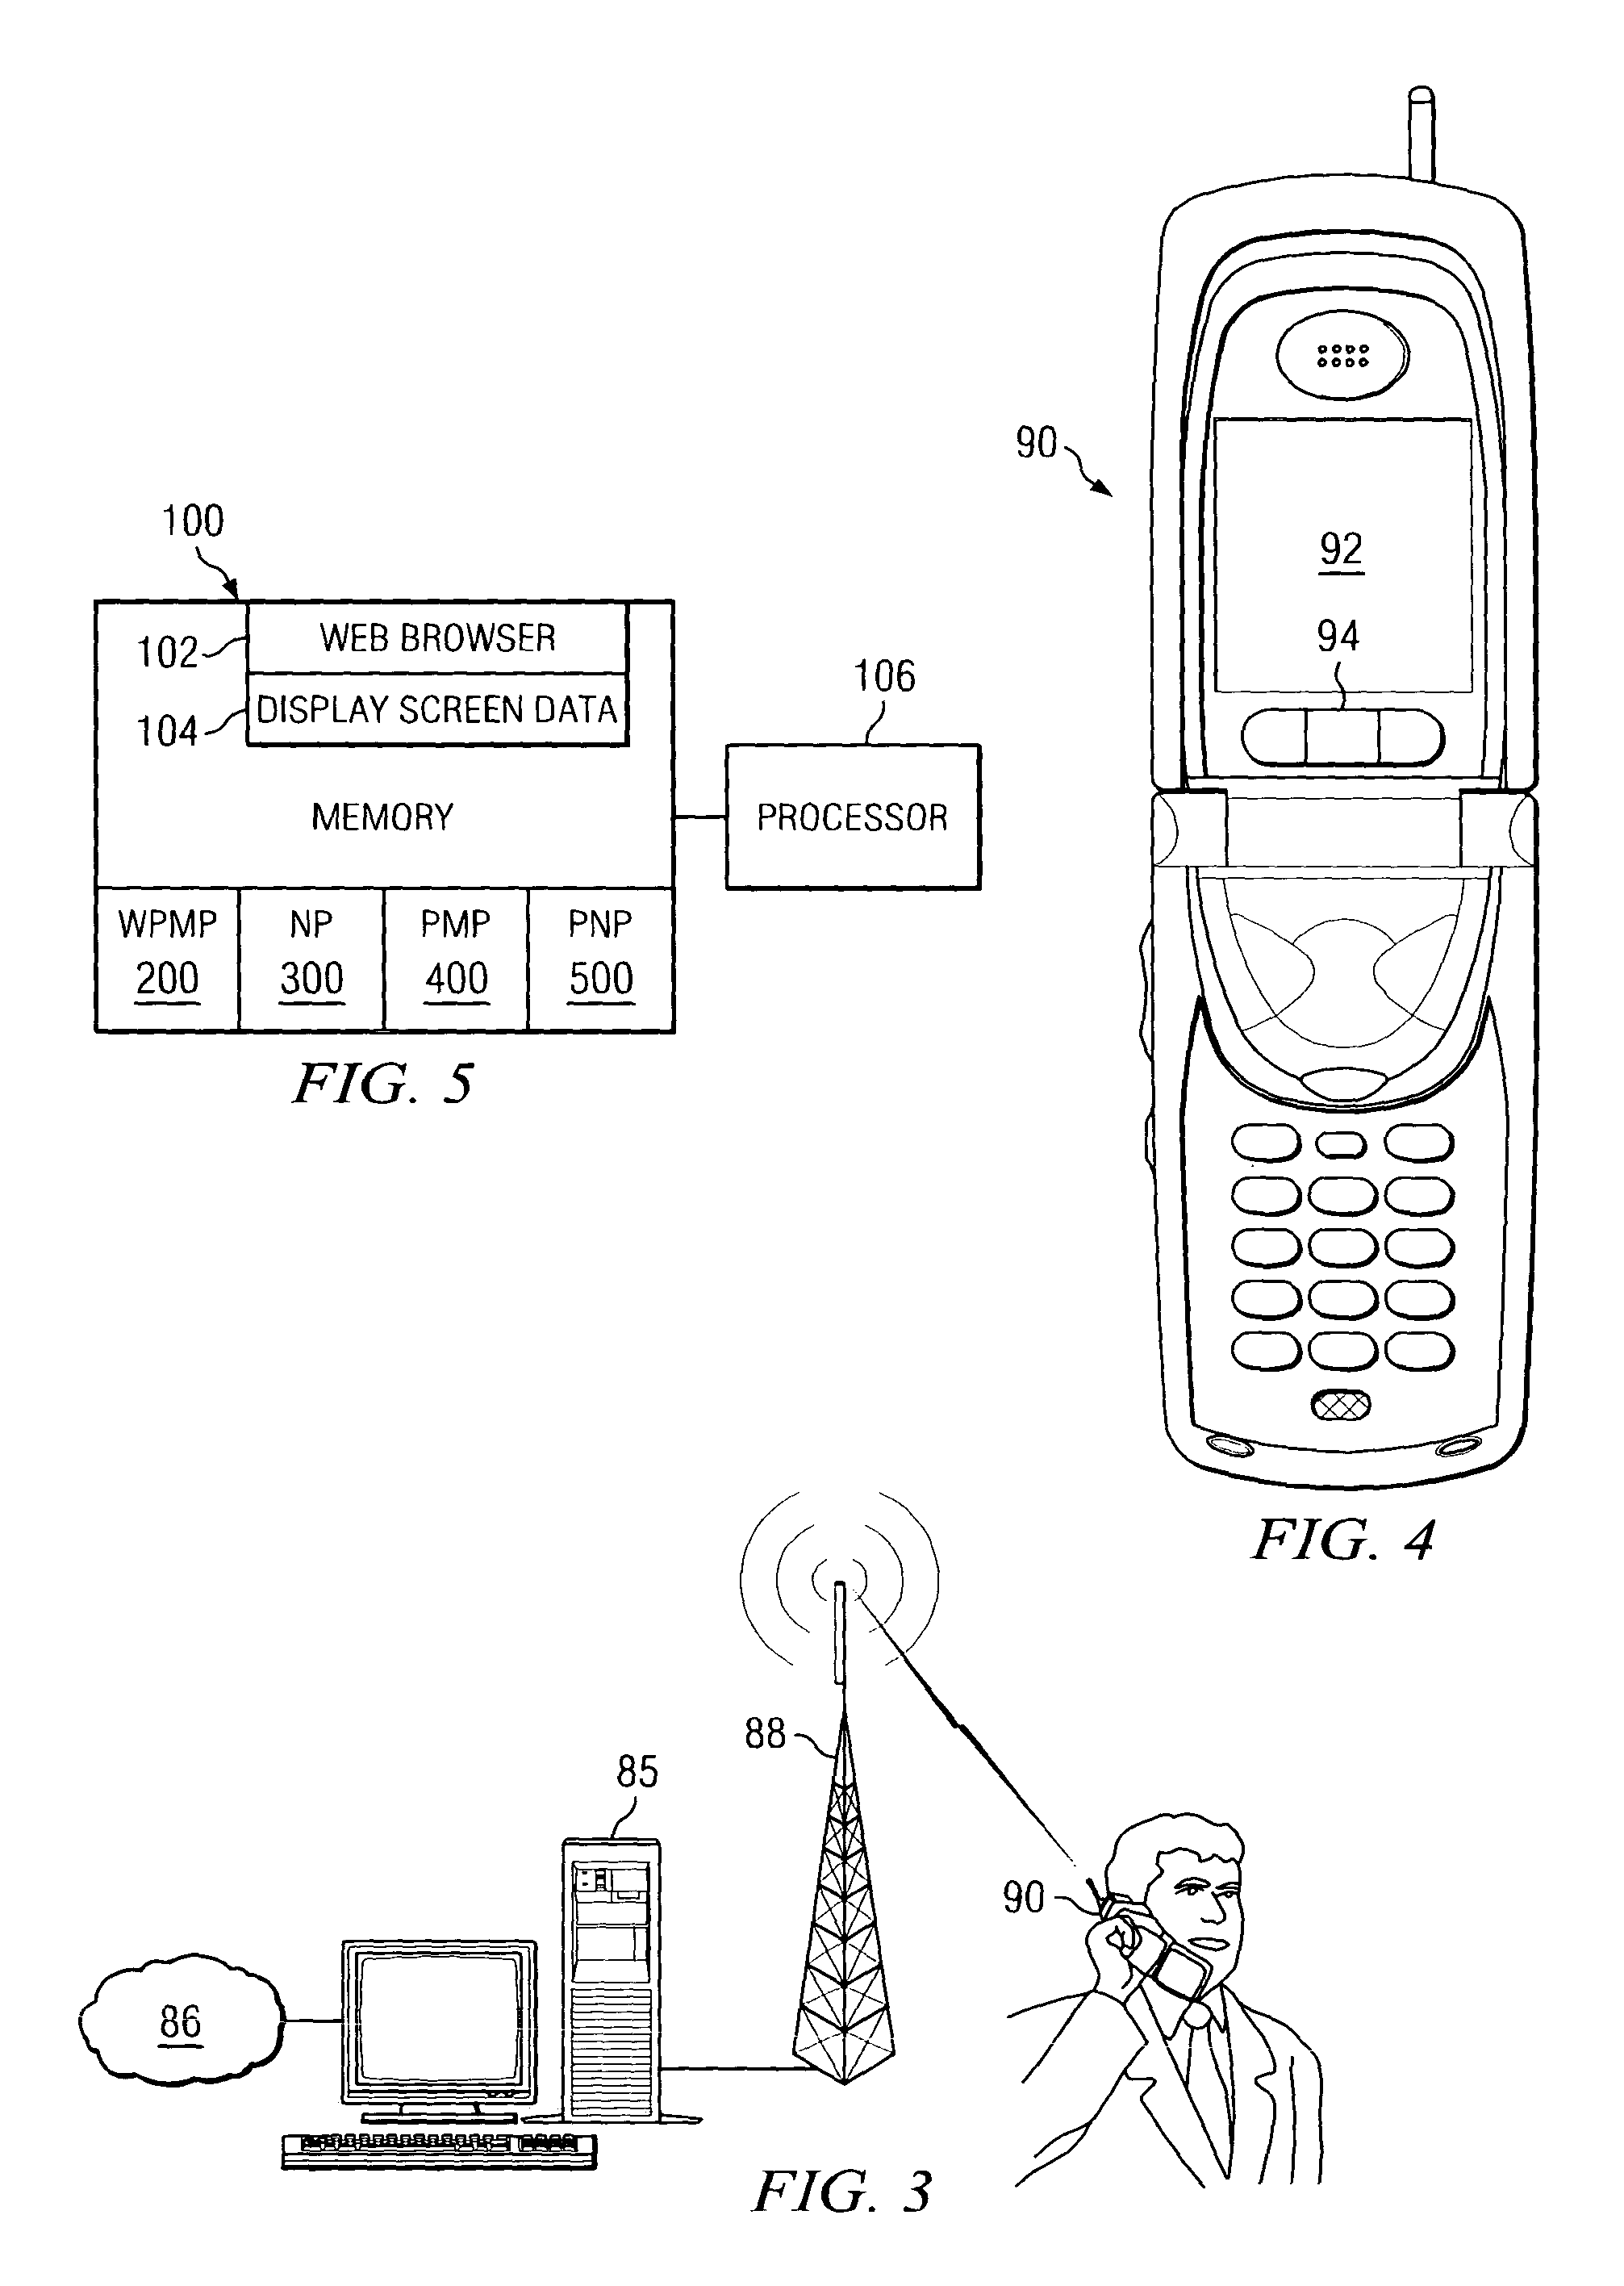 Apparatus and method for distributing portions of large web pages to fit smaller constrained viewing areas